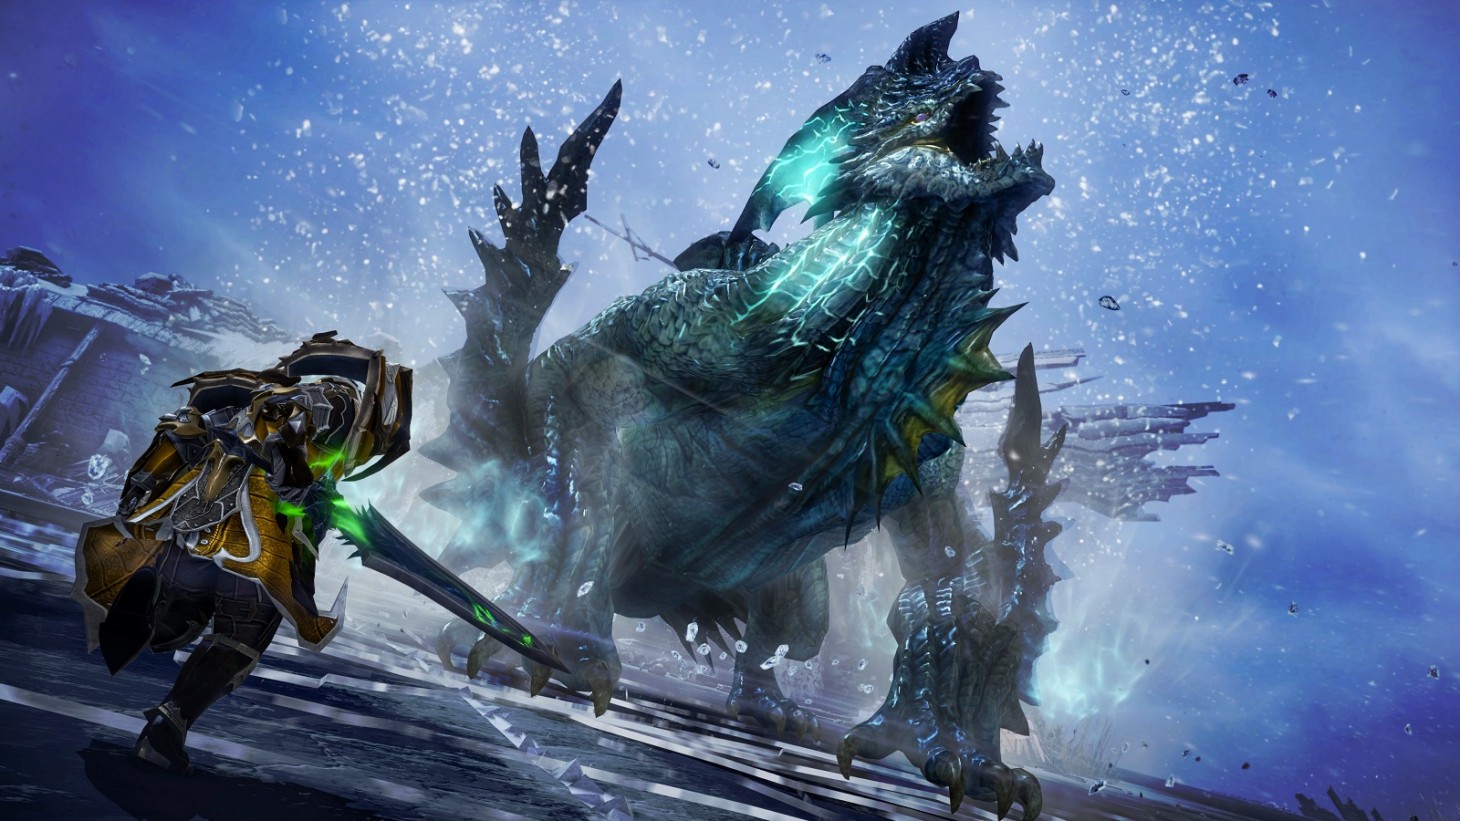 Check Out Upcoming MMORPG Lost Ark In A New Introduction